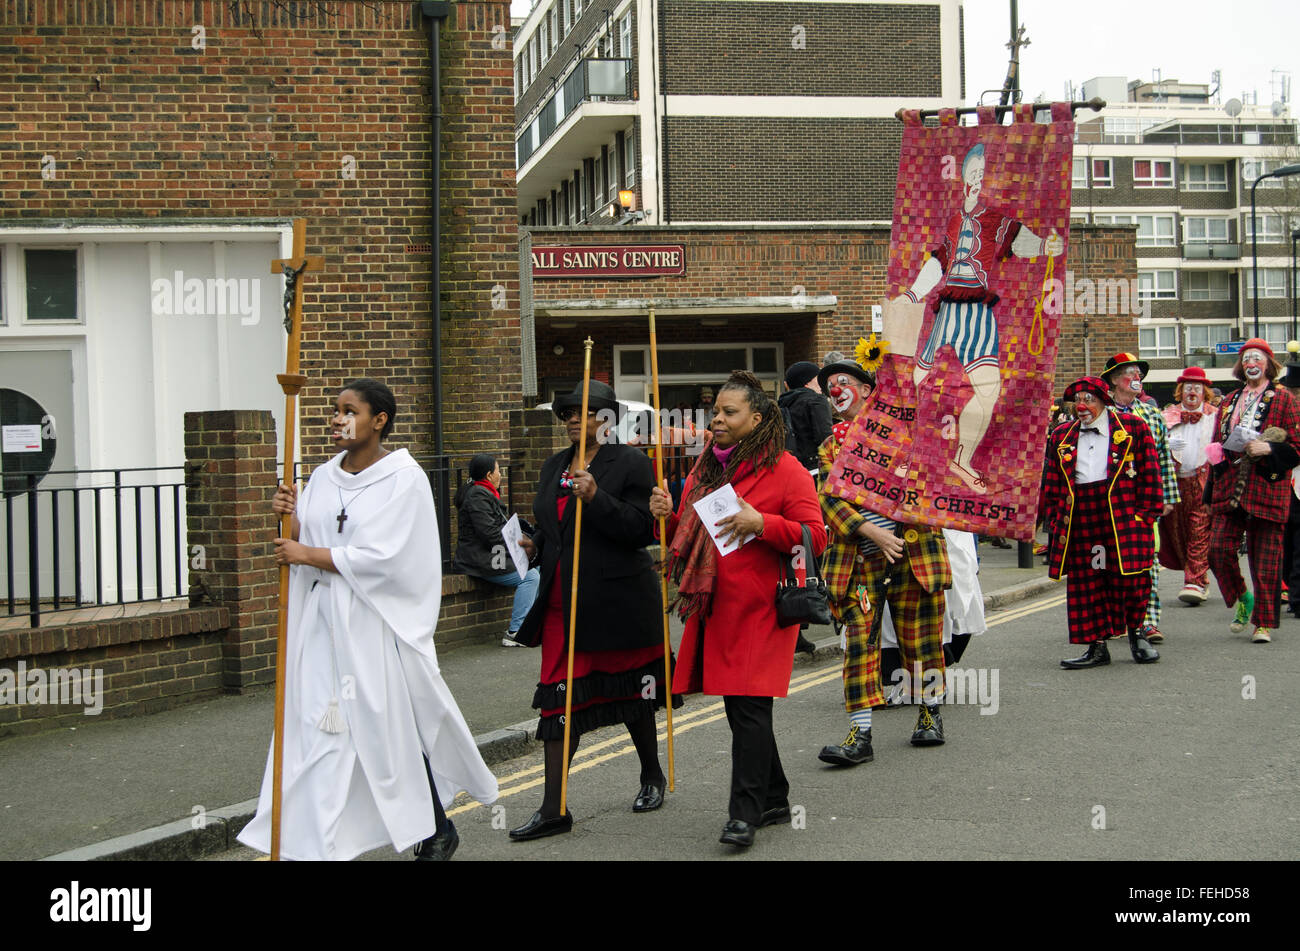 Hackney, London, UK. 7th February, 2016. Church officials and clowns process along the road to the annual memorial for Joseph Grimaldi, considered to be the King of Clowns.  All Saints Church, Haggerston, Hackney, East London. Credit:  Amanda Lewis/Alamy Live News Stock Photo